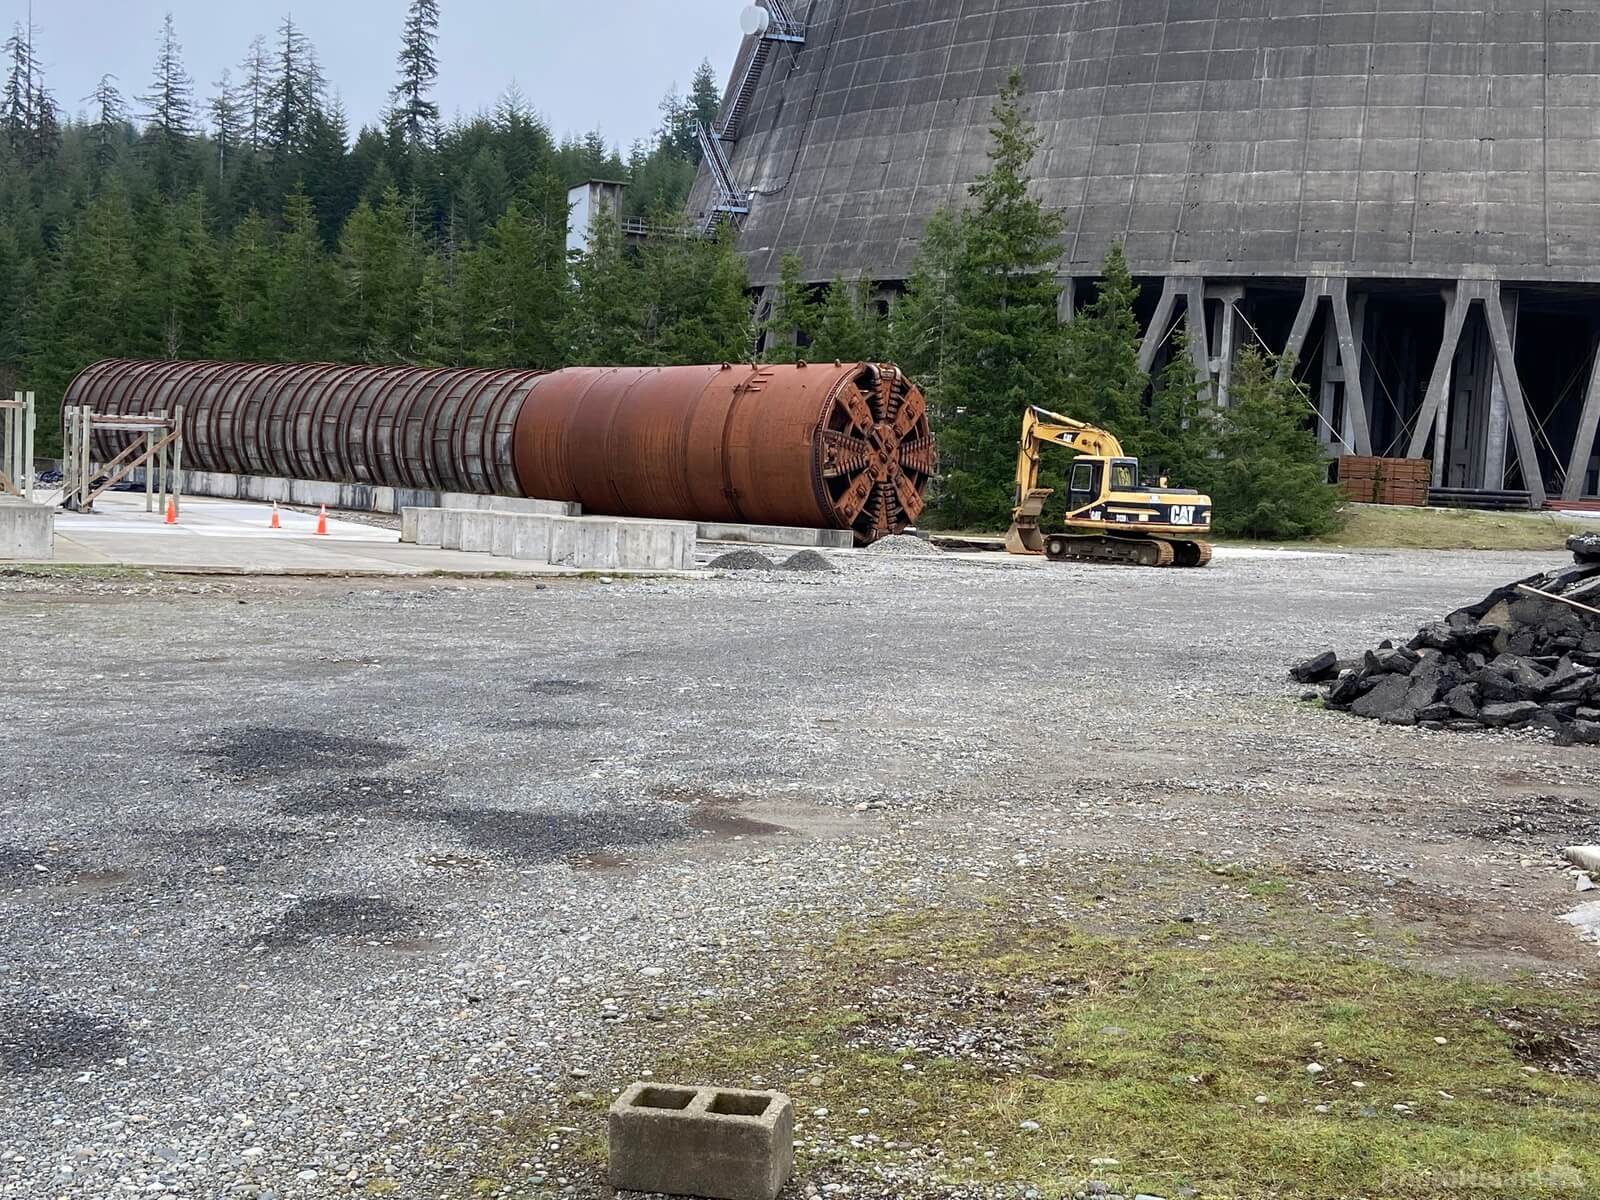 Image of Satsop Nuclear Power Plant by Steve West